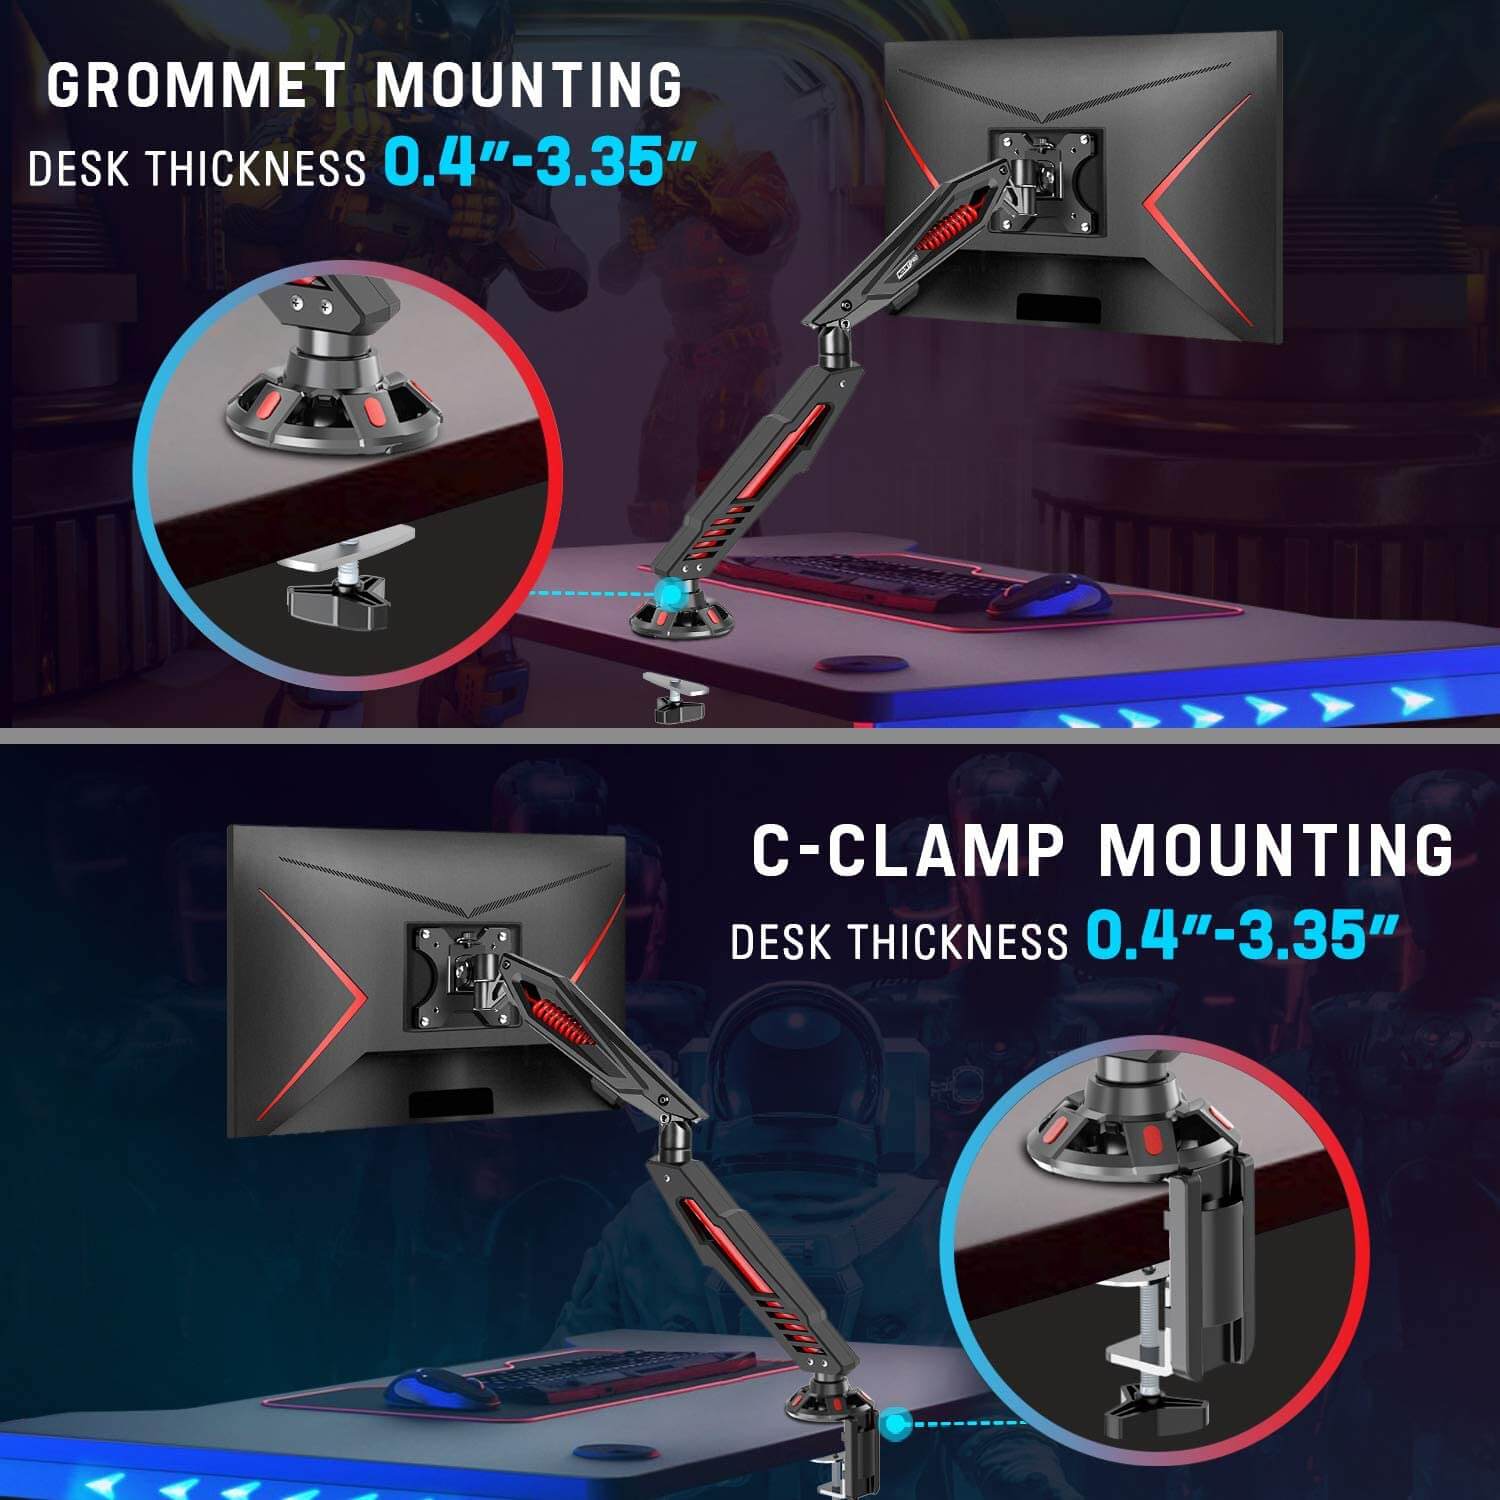 gaming monitor desk arm for grommet and c-clamp mounting